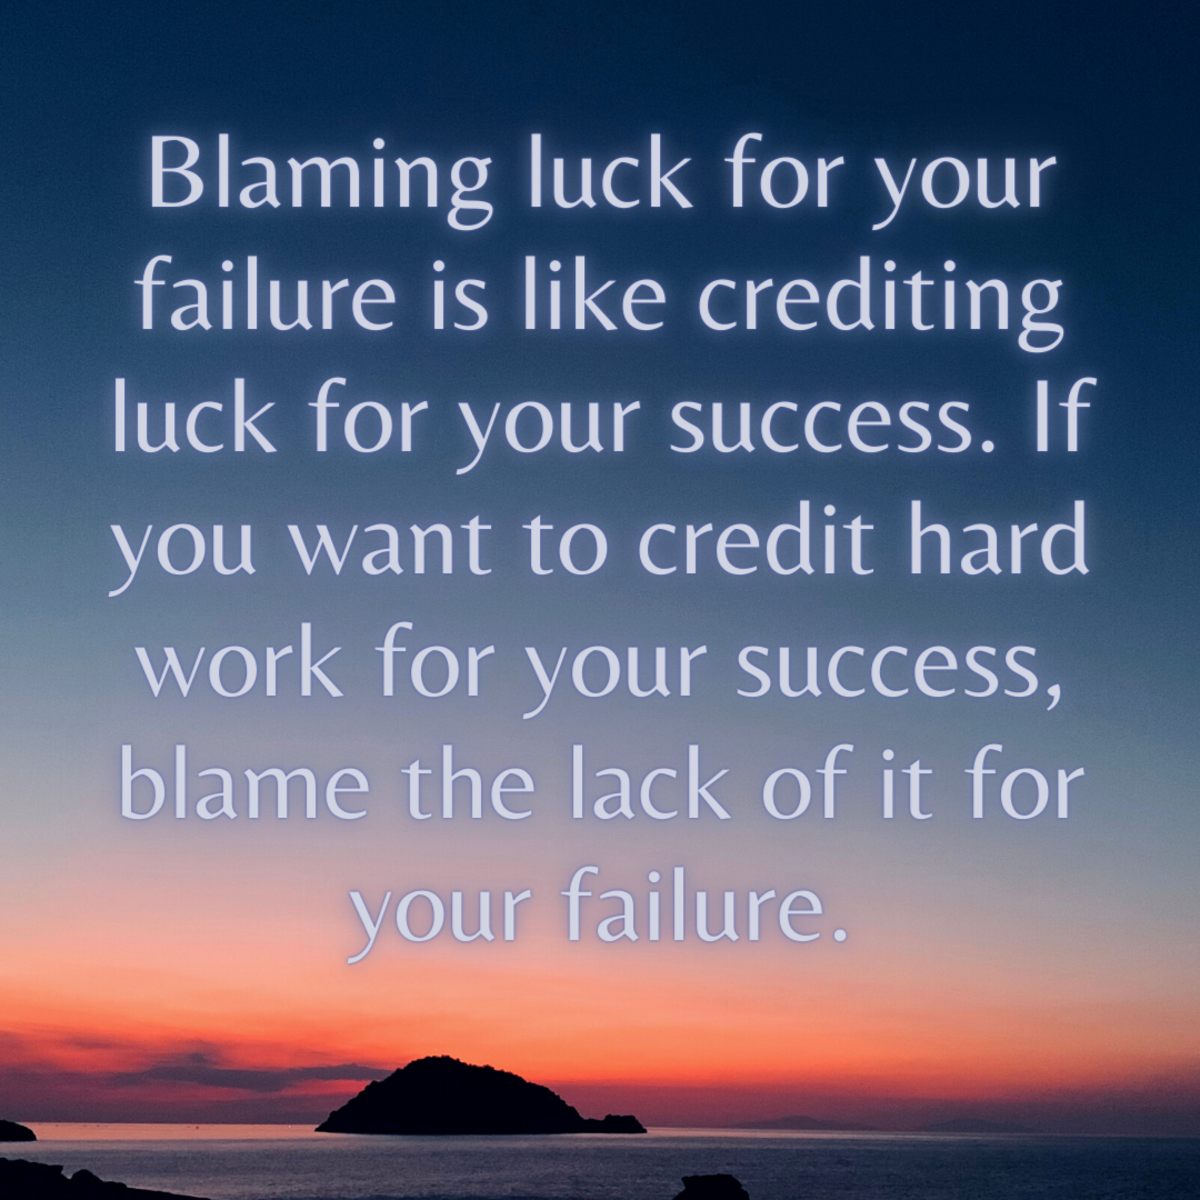 Luck is a two-way street—if you're going to blame the bad times on bad luck, you'll have to credit the good times to good luck, too!